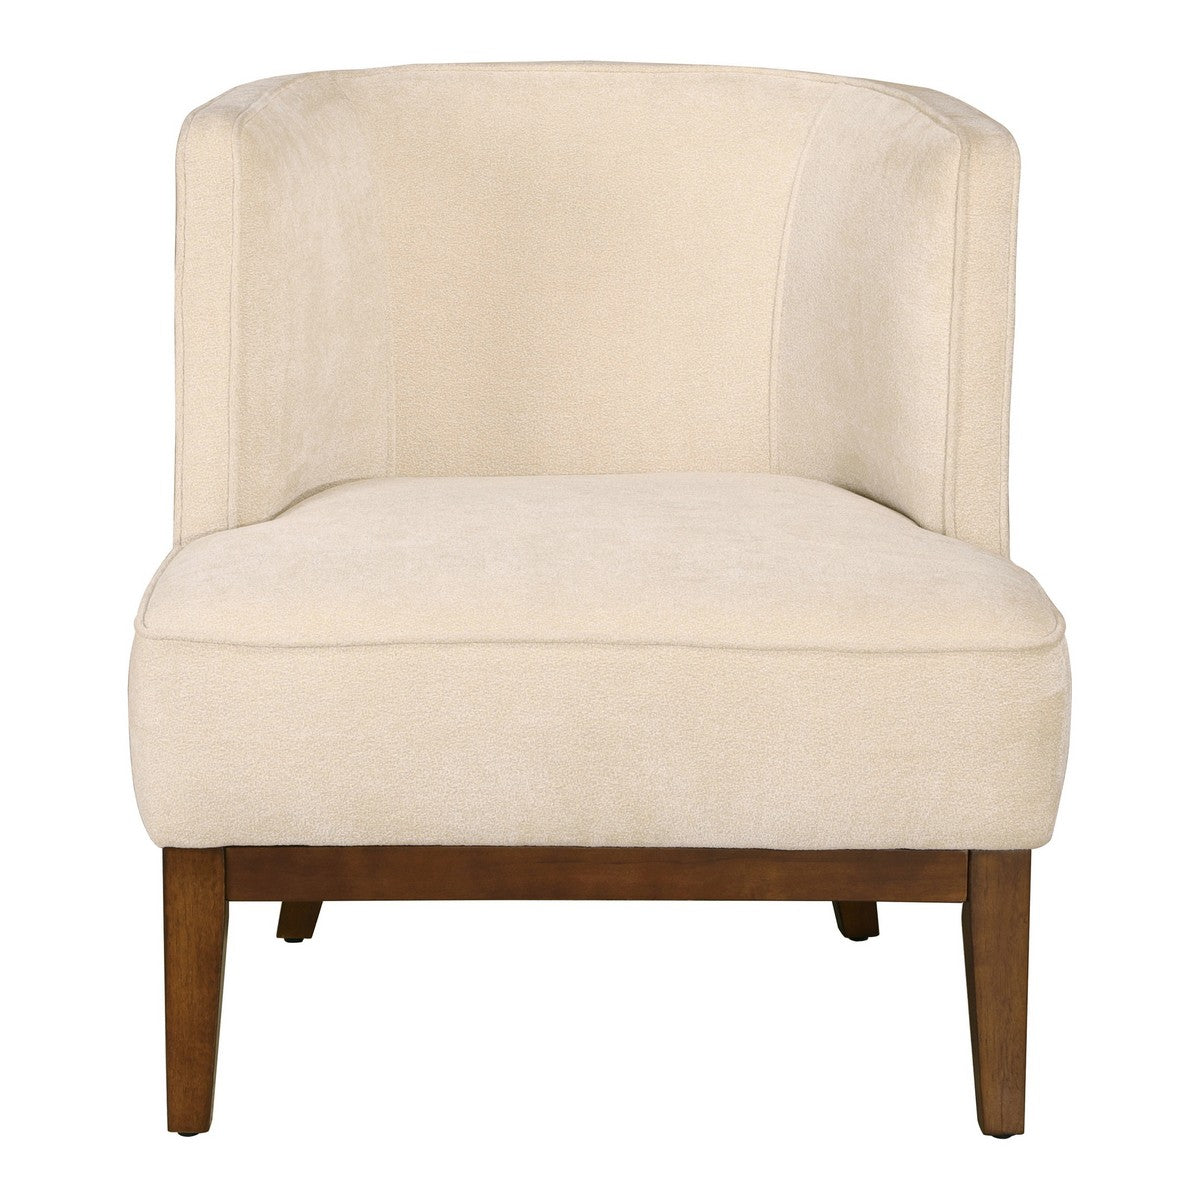 Moe's Home Collection Daniel Chair Beige - RN-1141-34 - Moe's Home Collection - lounge chairs - Minimal And Modern - 1